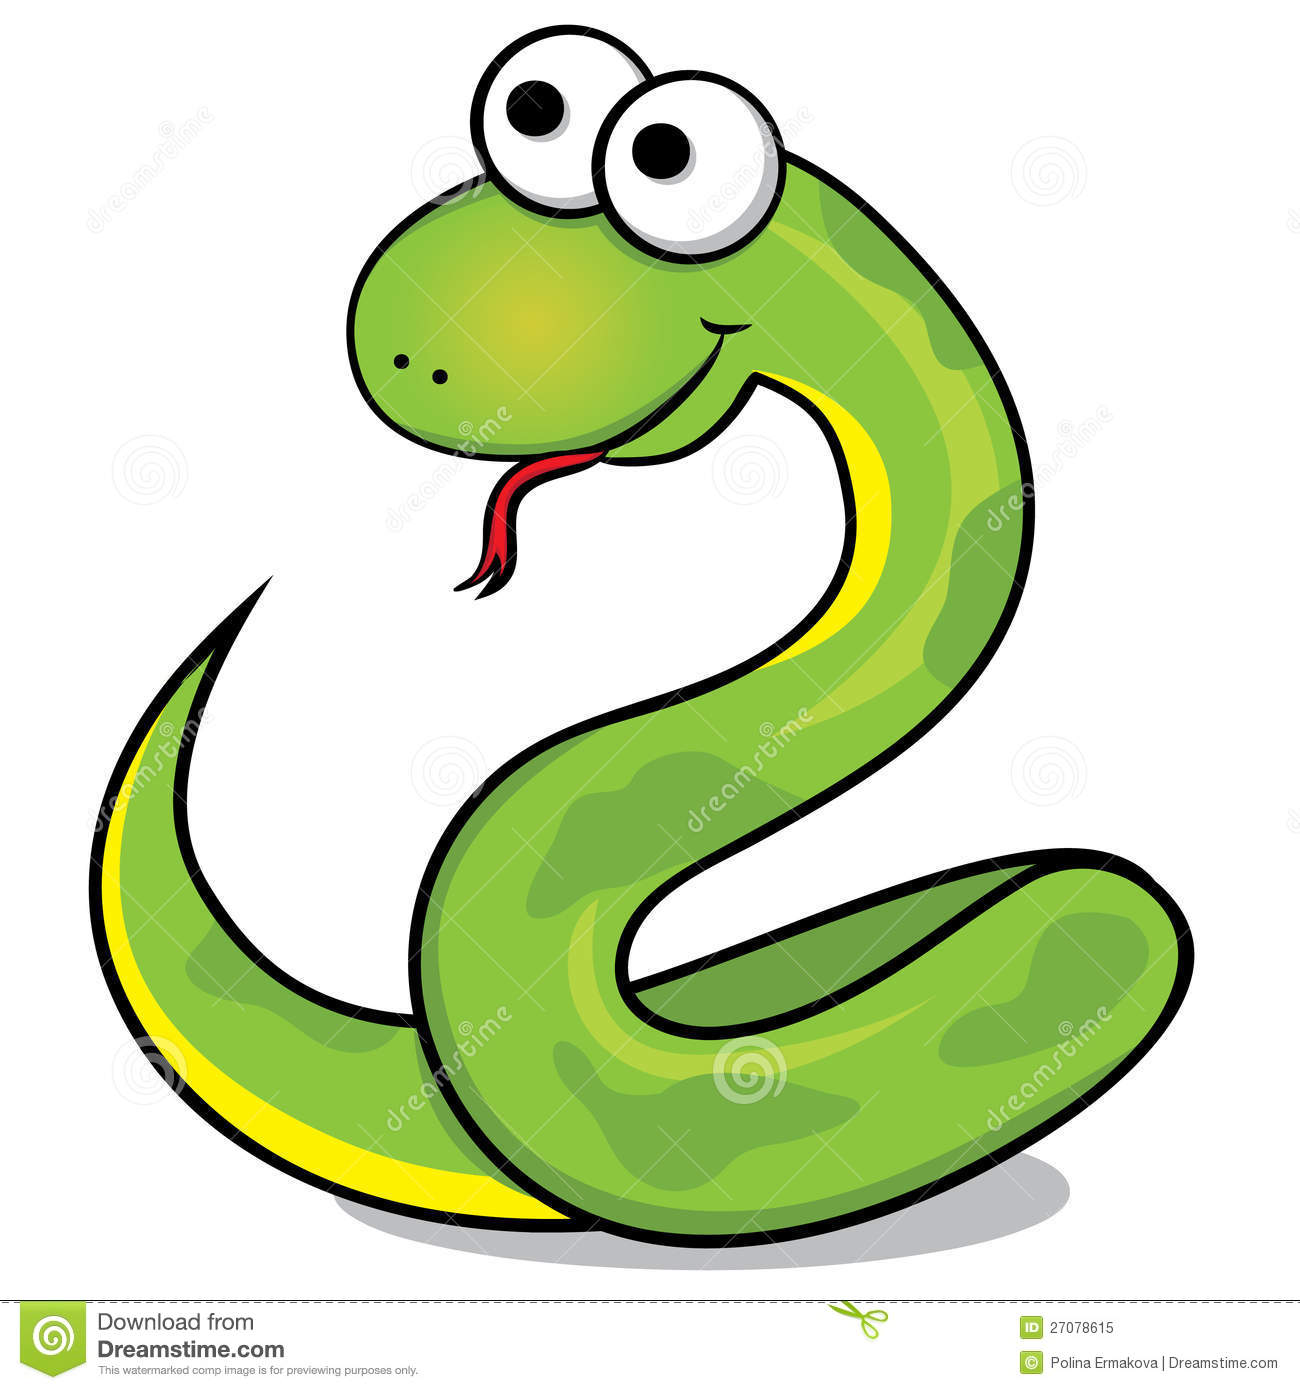 Clipart funny snake free vect